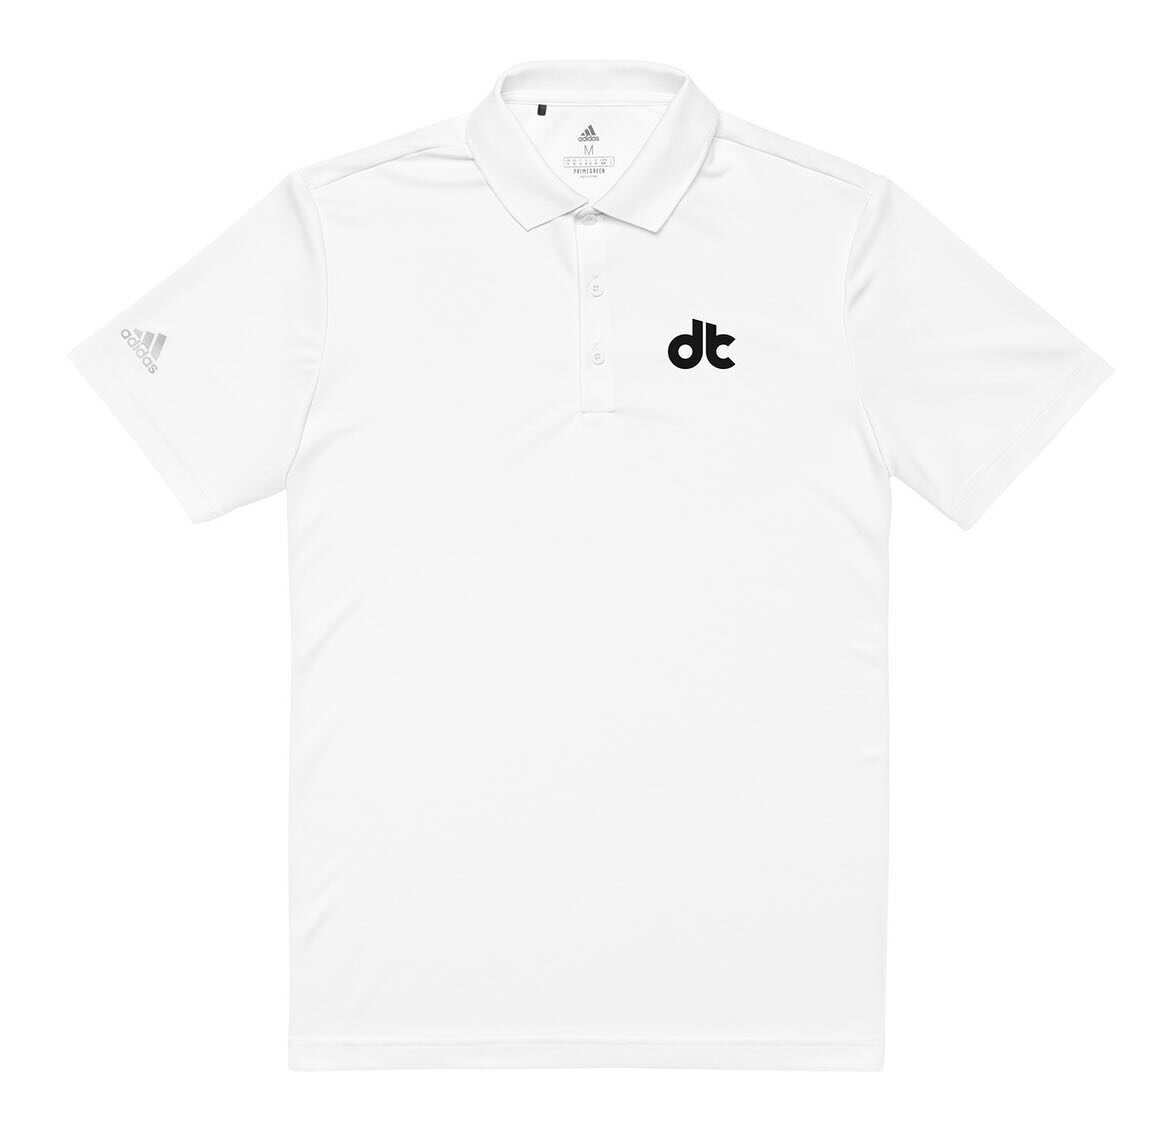 Back to my design roots. Stefan Edberg and Steffi Graf were player muses for which I designed &hellip;for the brand who makes the DBC Eco Polo. Performance fabric, crisp style, comfortable and sustainable. Shop link in Bio.